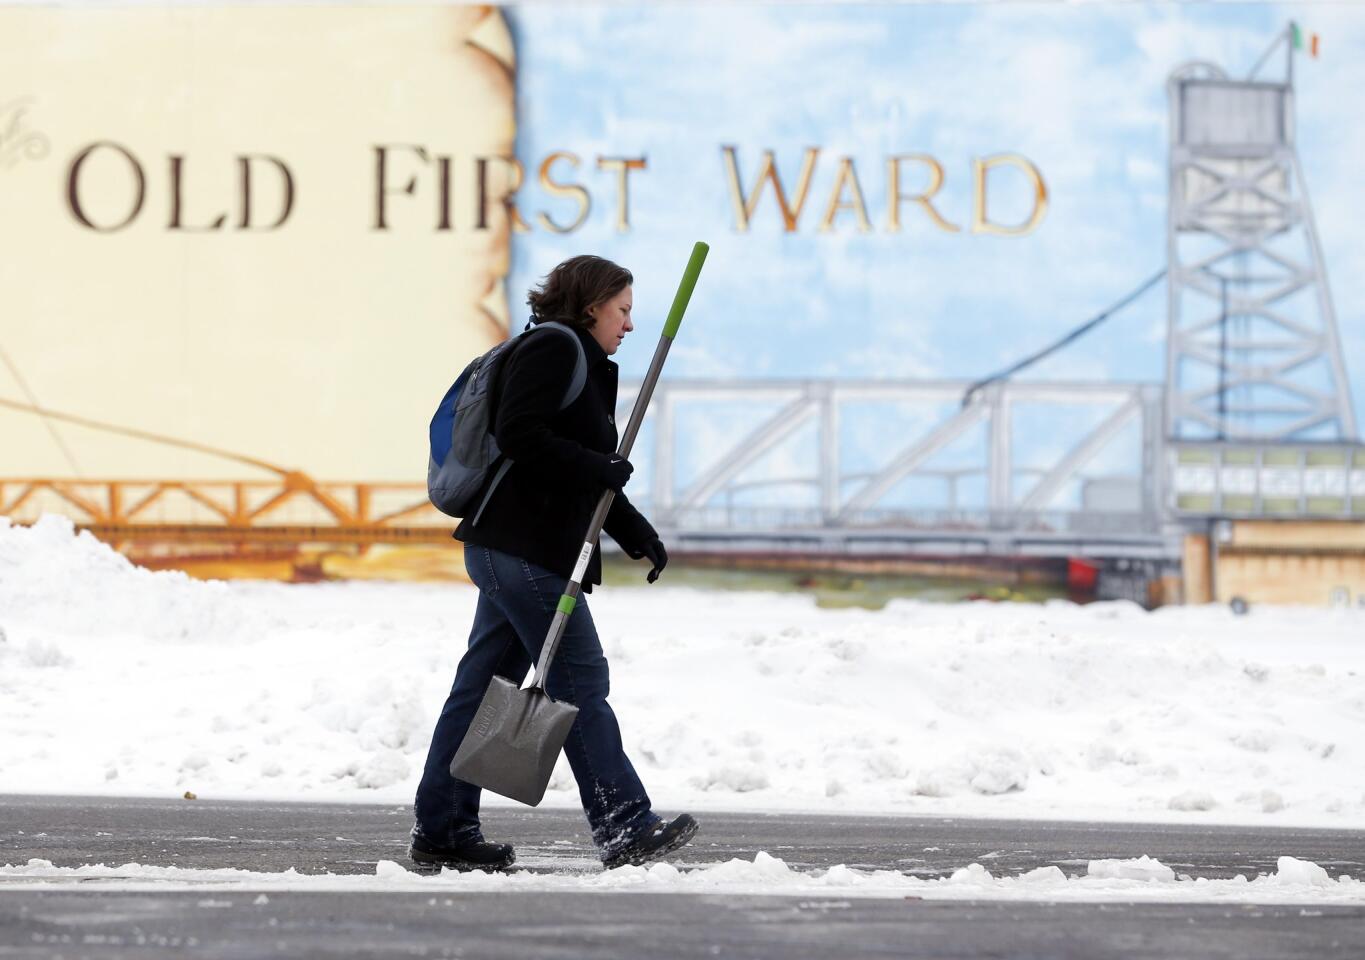 Beth Bragg carries a snow shovel to the Old First Ward Community Center in Buffalo, N.Y.